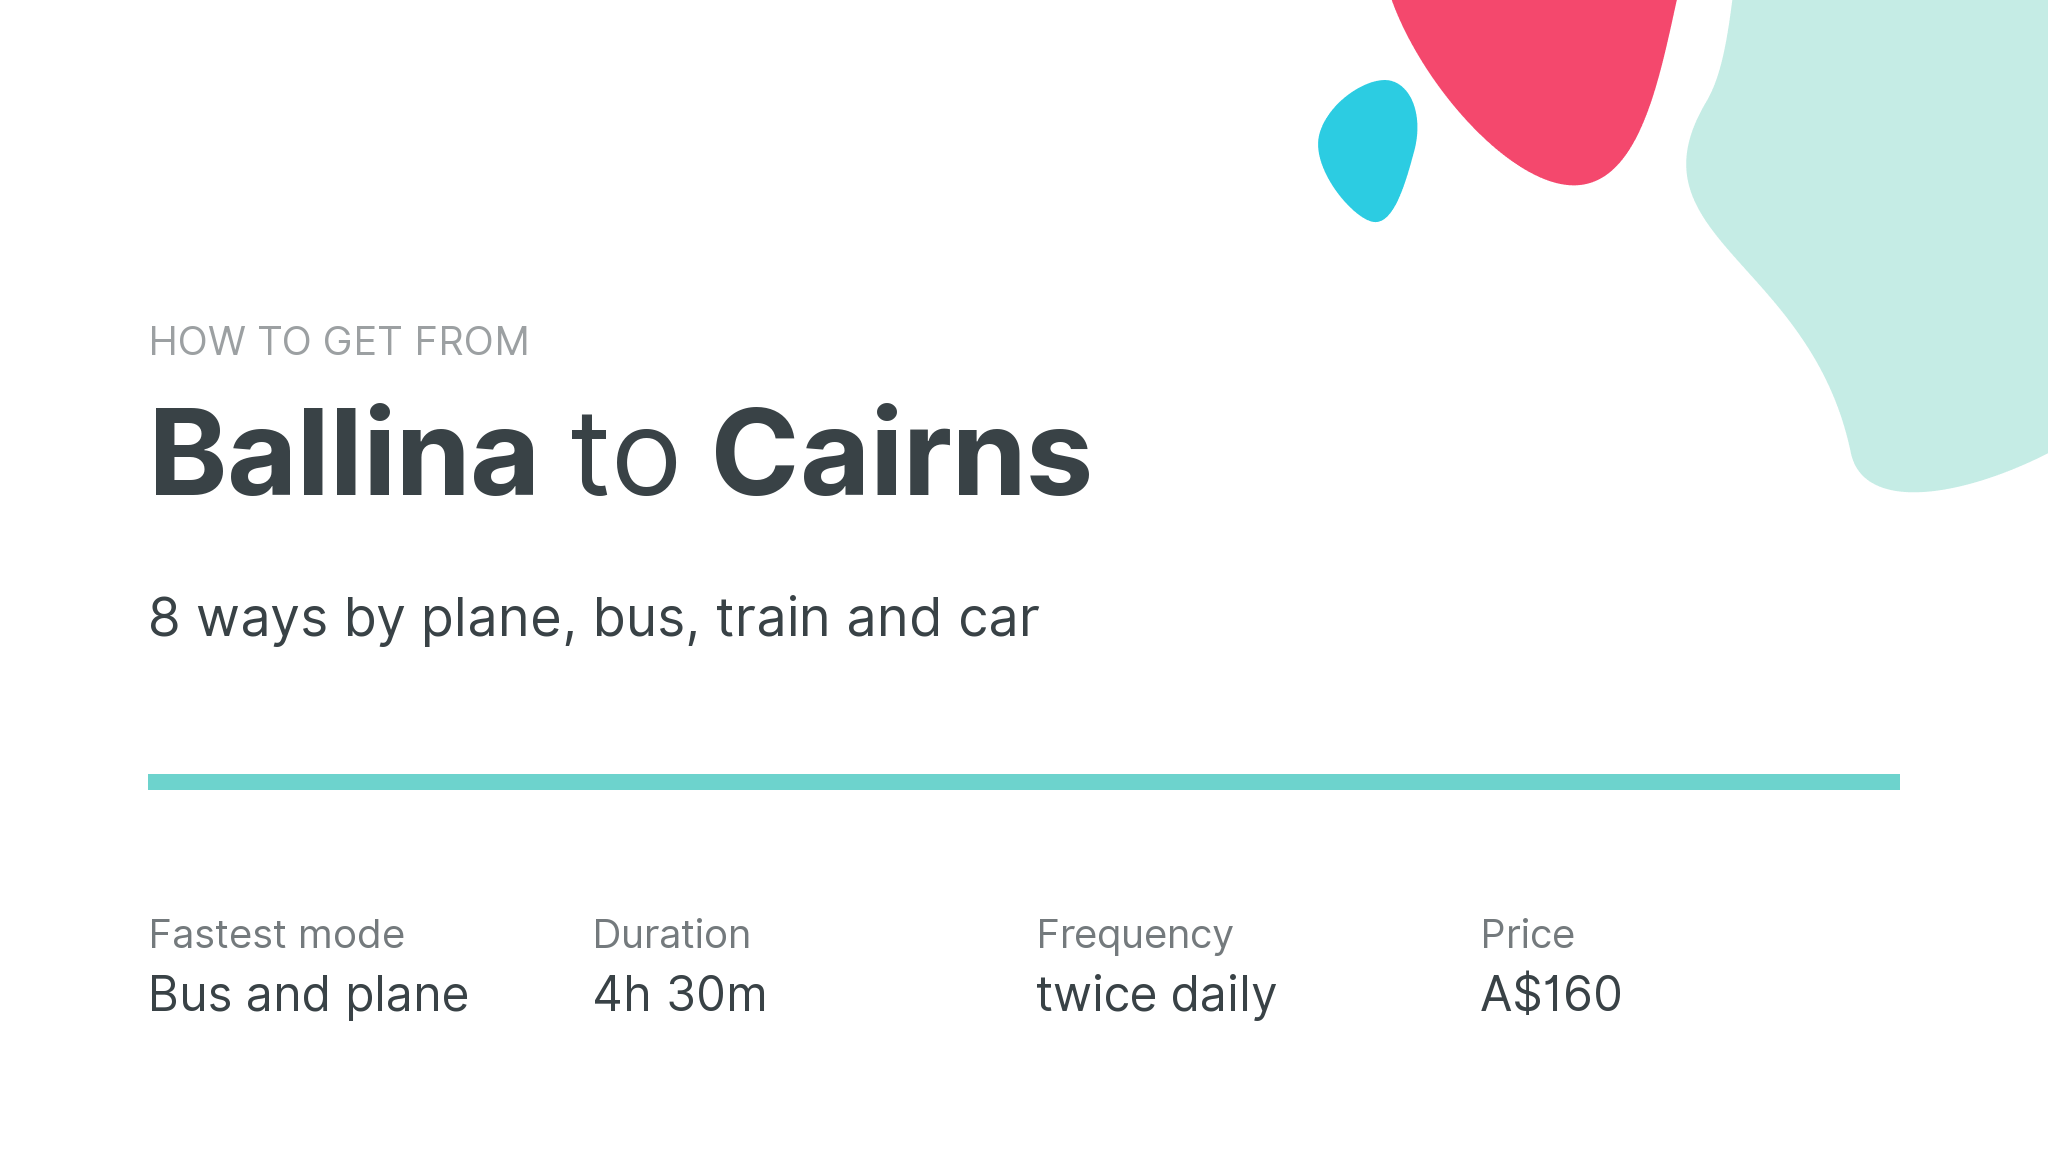 How do I get from Ballina to Cairns